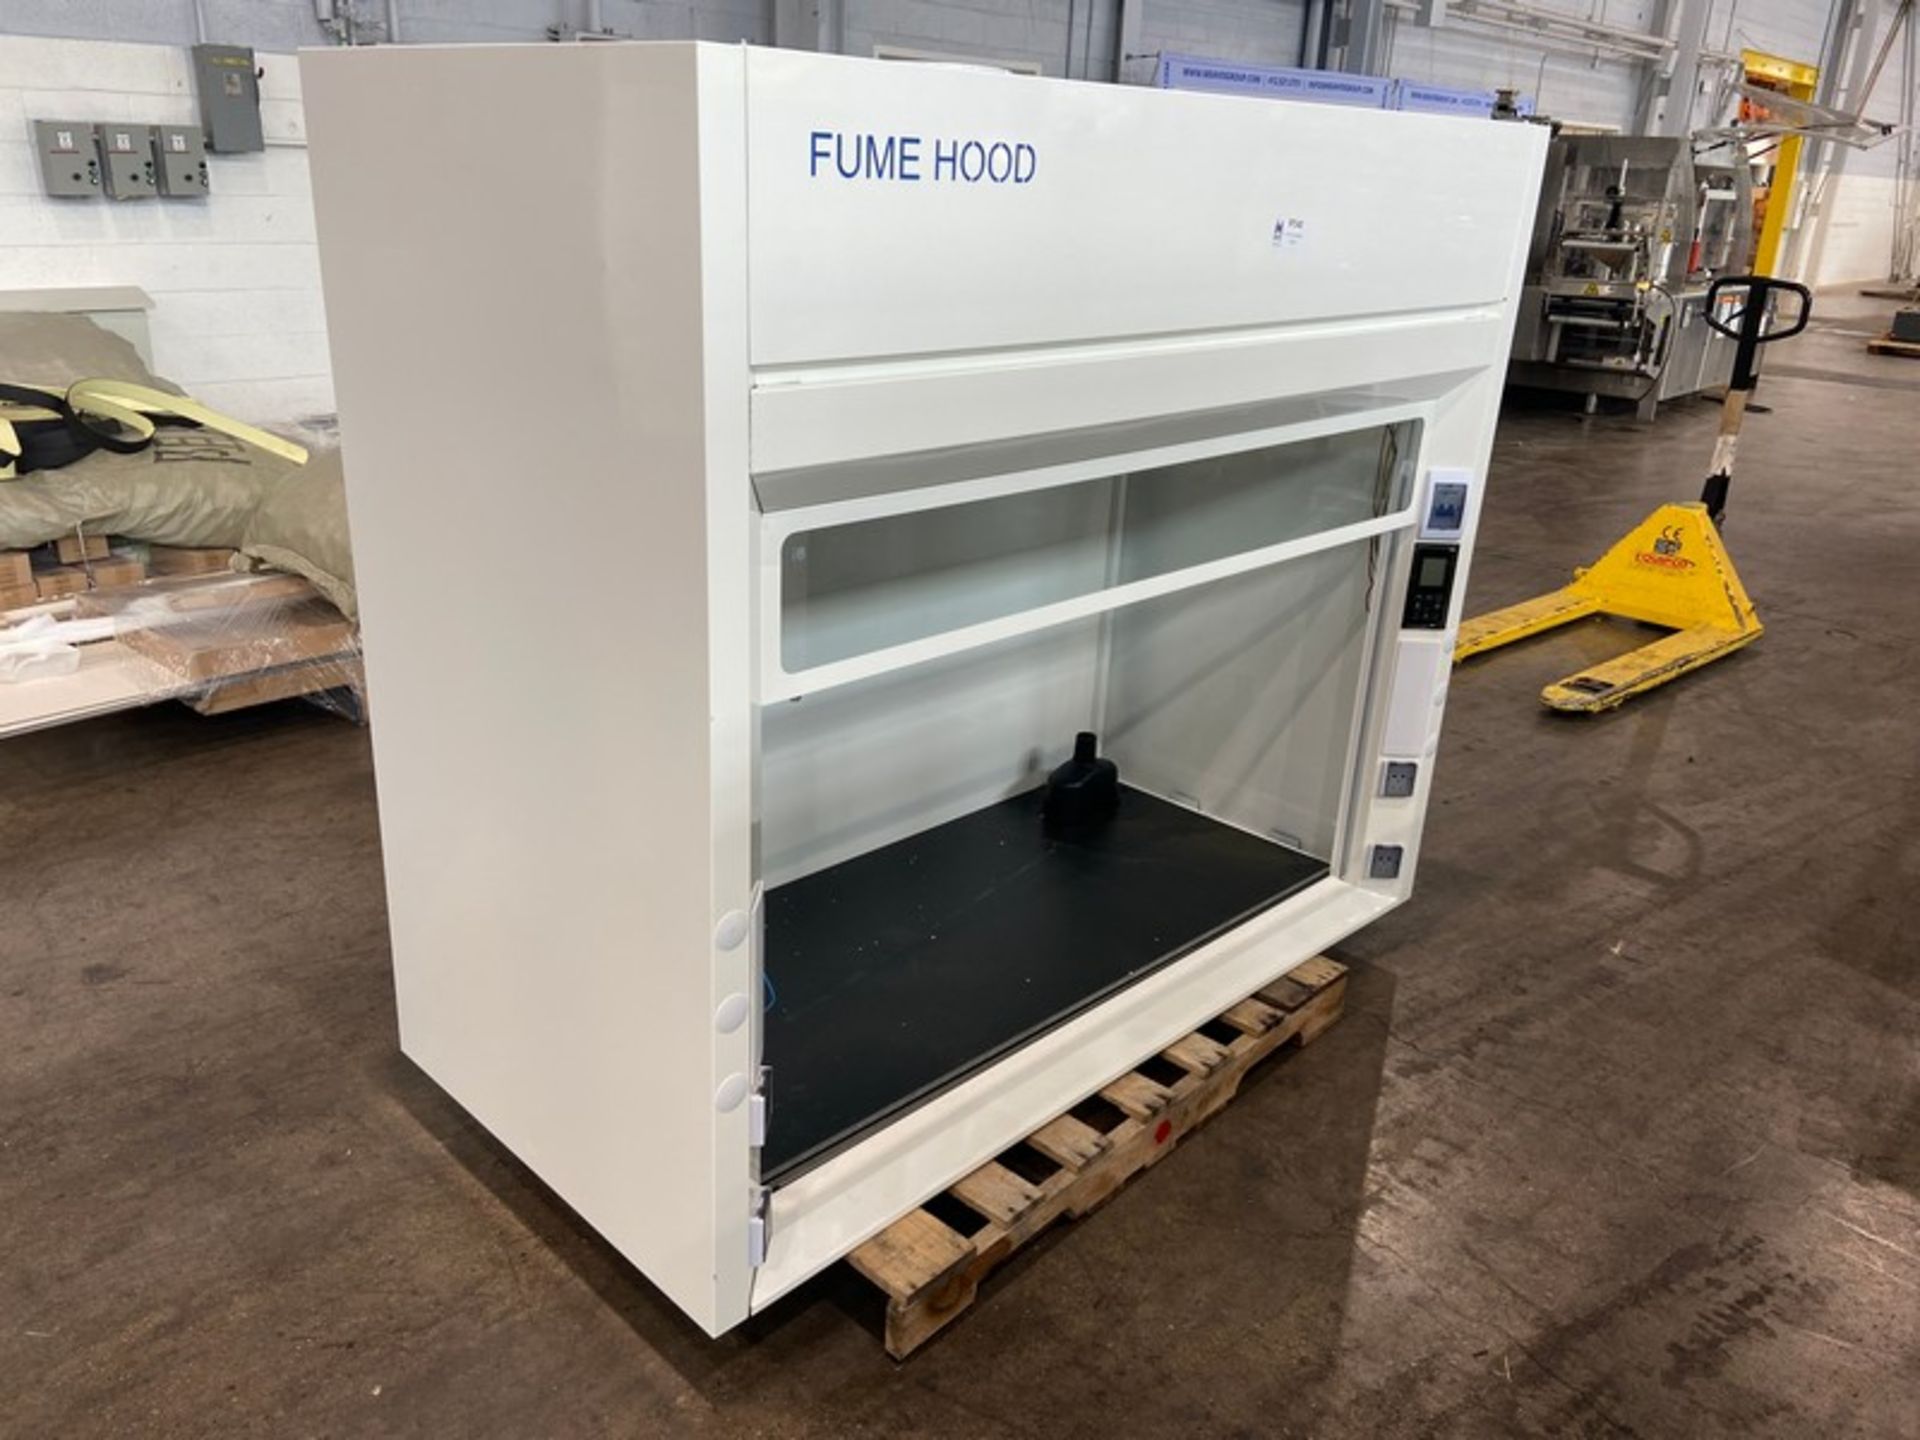 Fume Hood, Overall Dims.: Aprox. 71" L x 33-1/2" W x 59" H (INV#97142) (Located @ the MDG Auction - Image 2 of 5